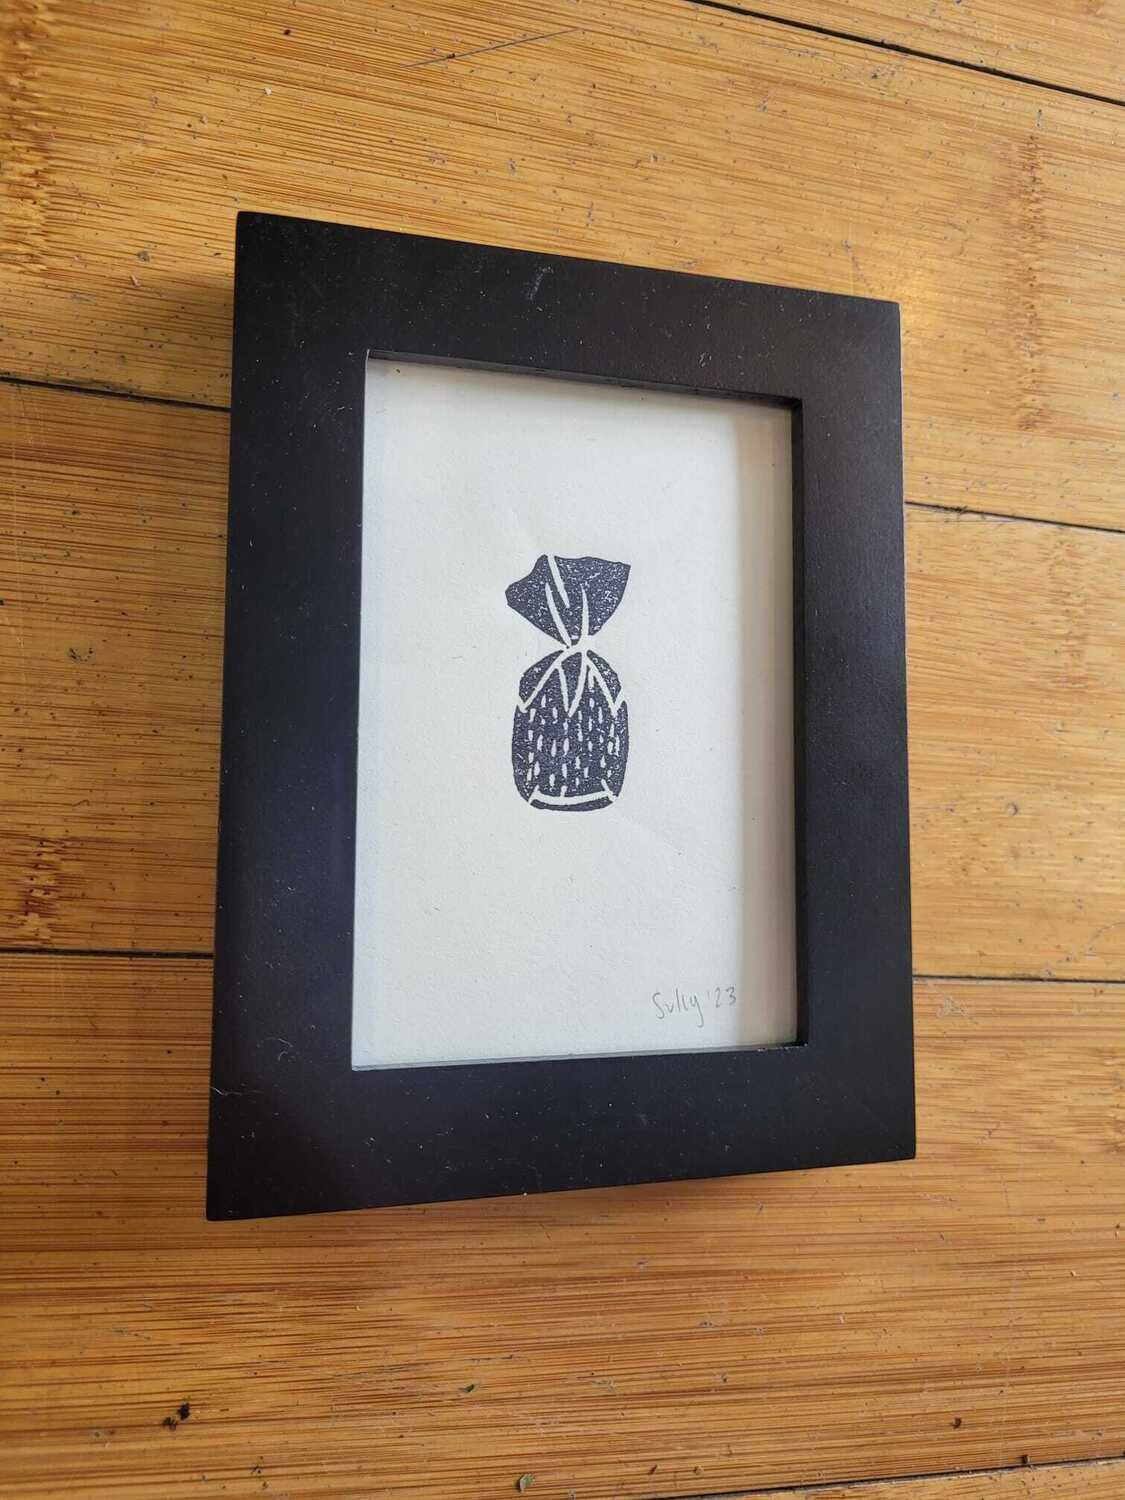 Good Luck Strawberry - Block Print by Sully Kaiju